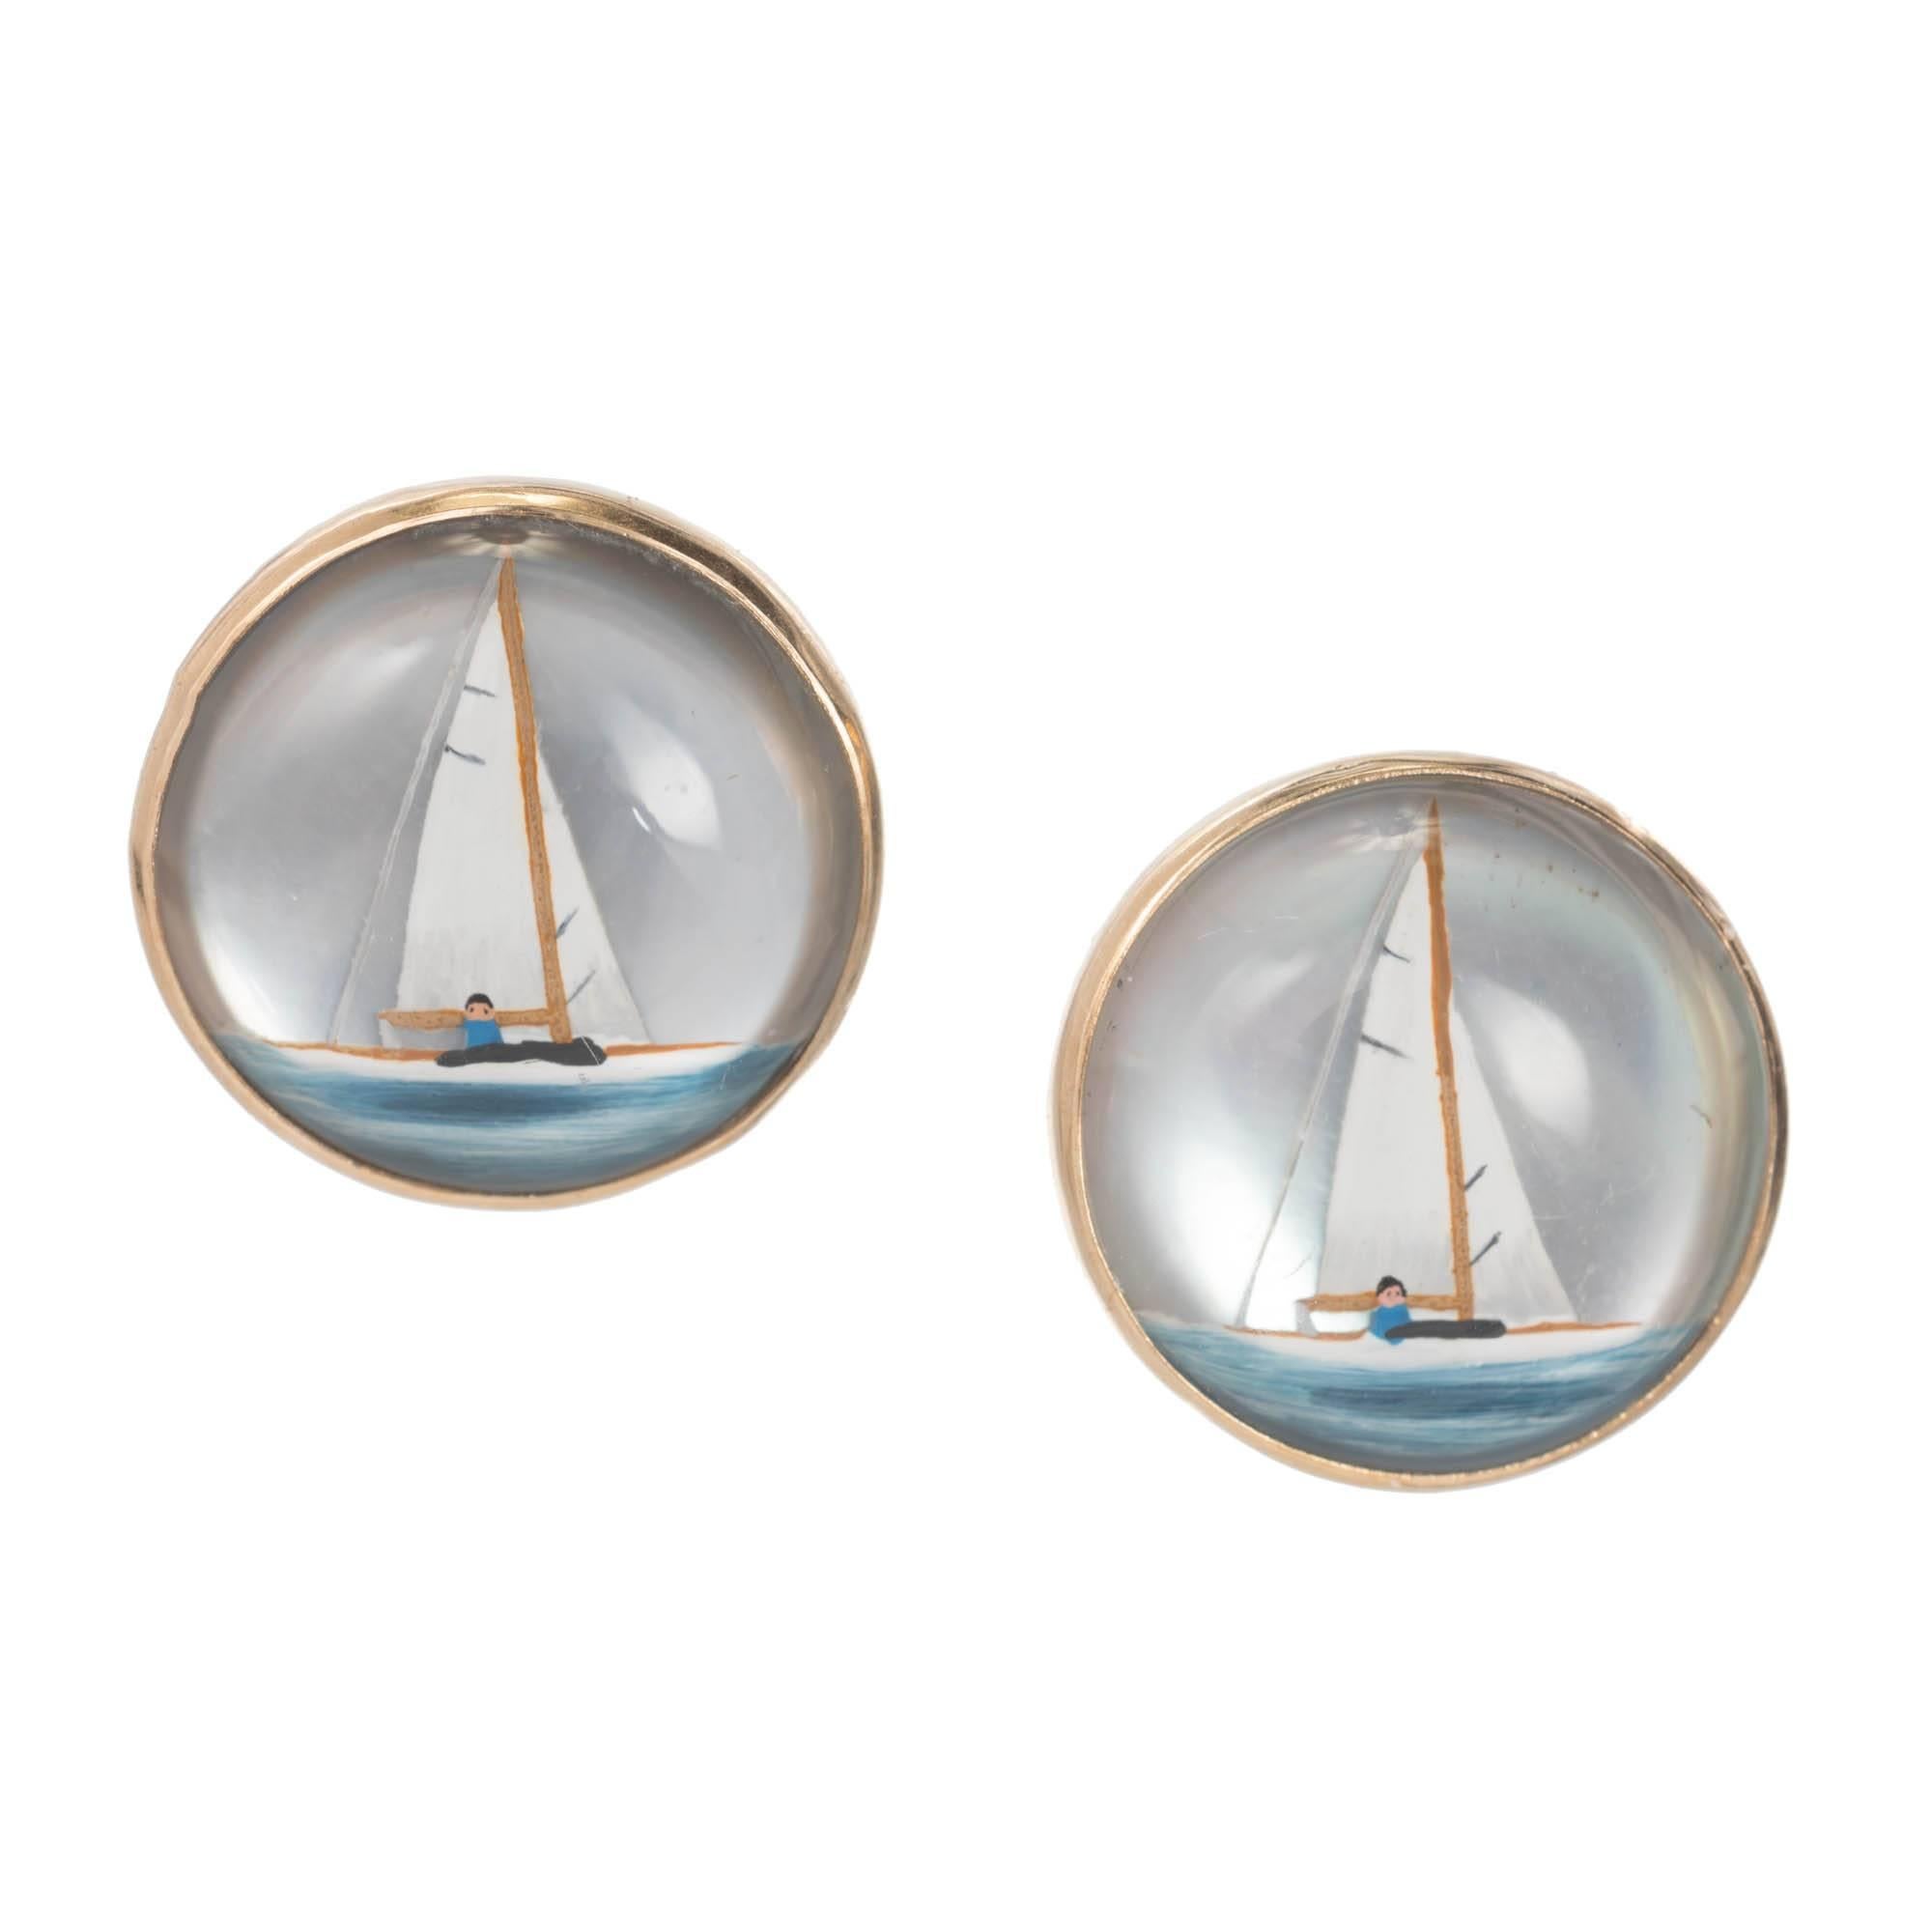 Reverse Hand-Painted Carved Quartz Gold Sailboat Pierced Stud Earrings